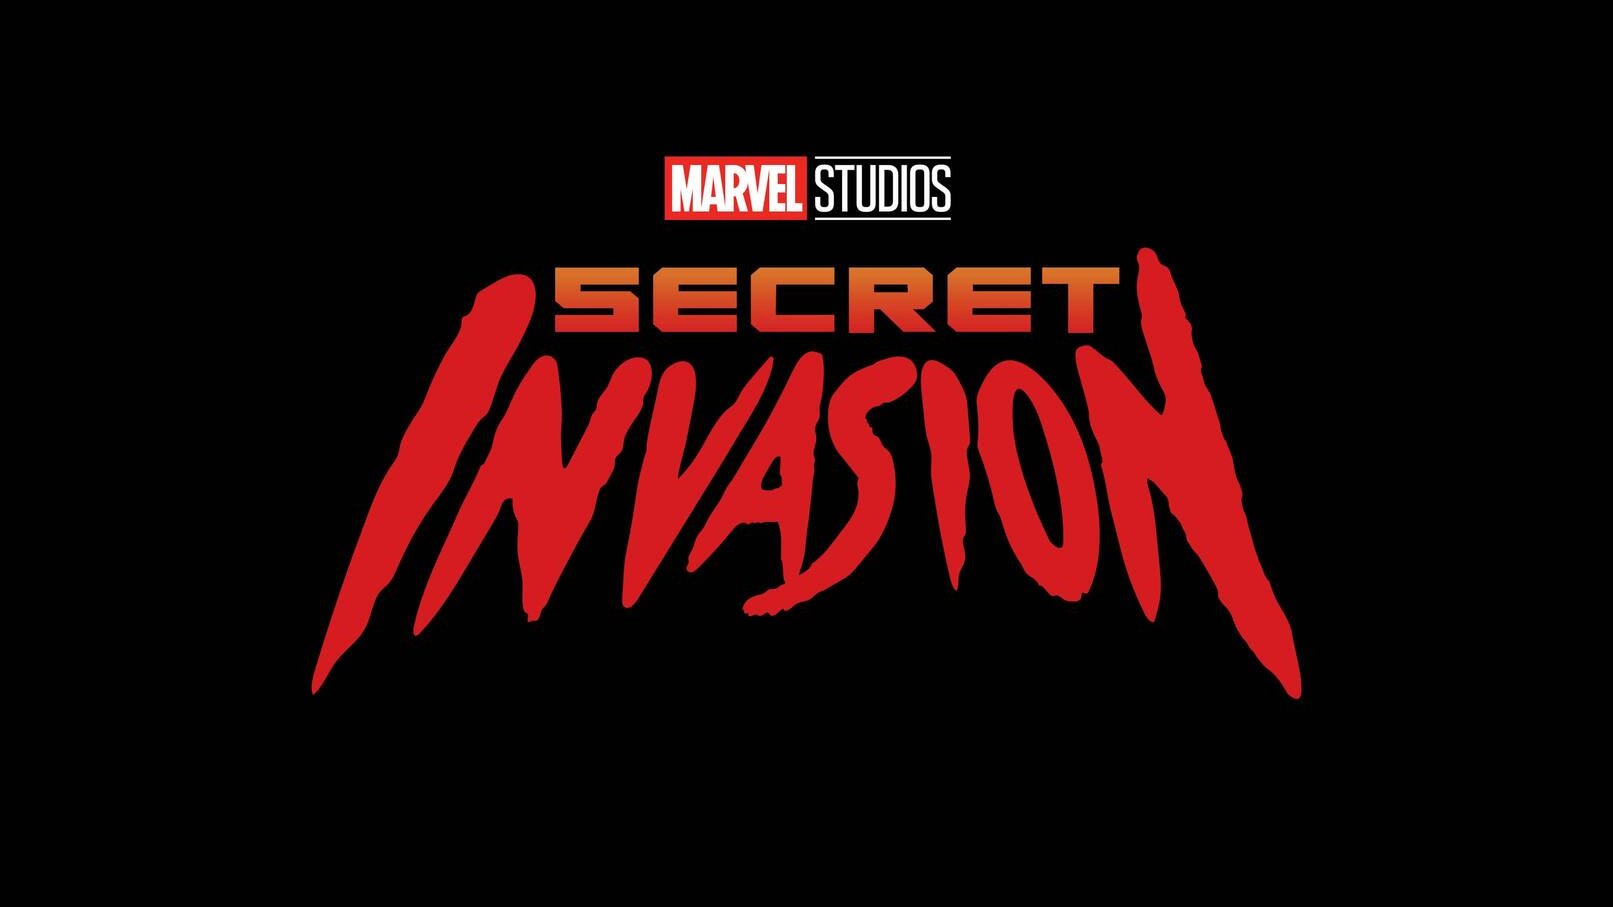 Exclusive: The Cast Of Marvel’s Secret Invasion Series Revealed